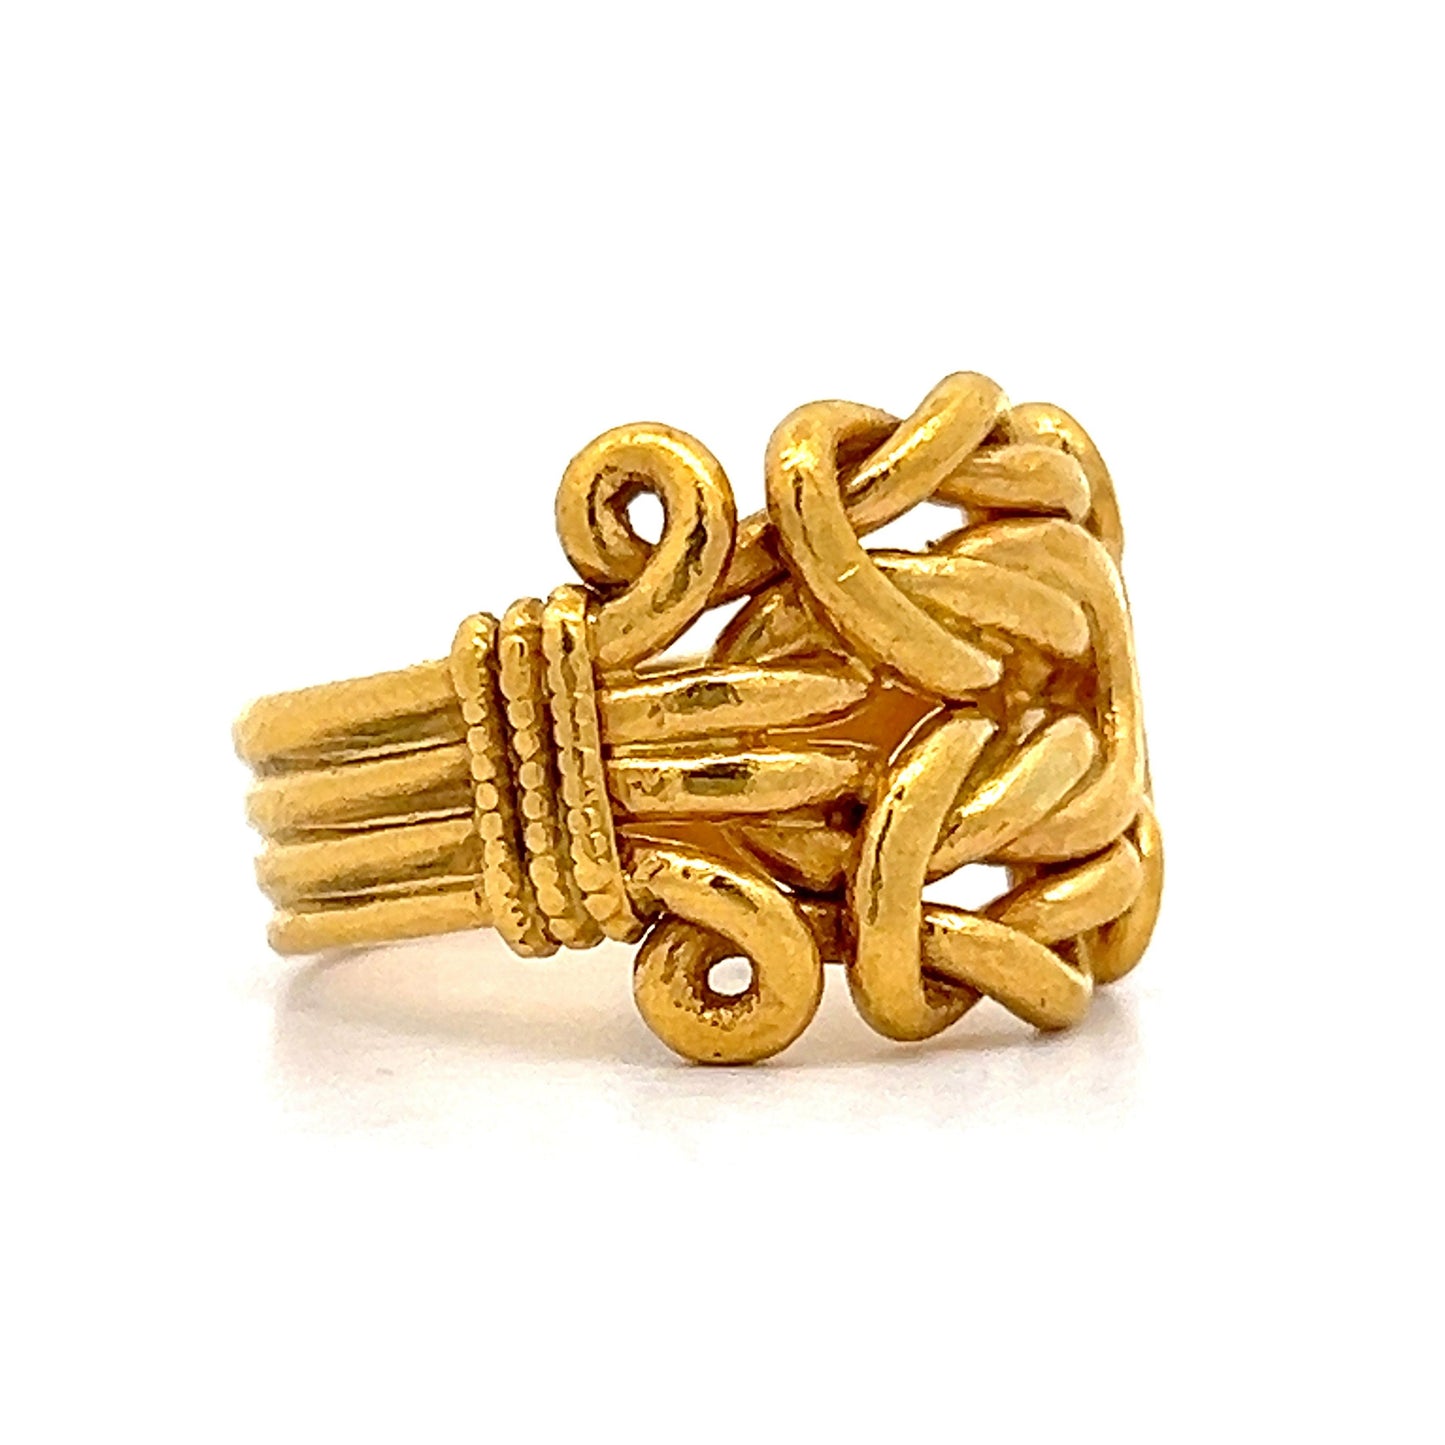 Vintage Victorian Knot Ring  in 24k Yellow Gold